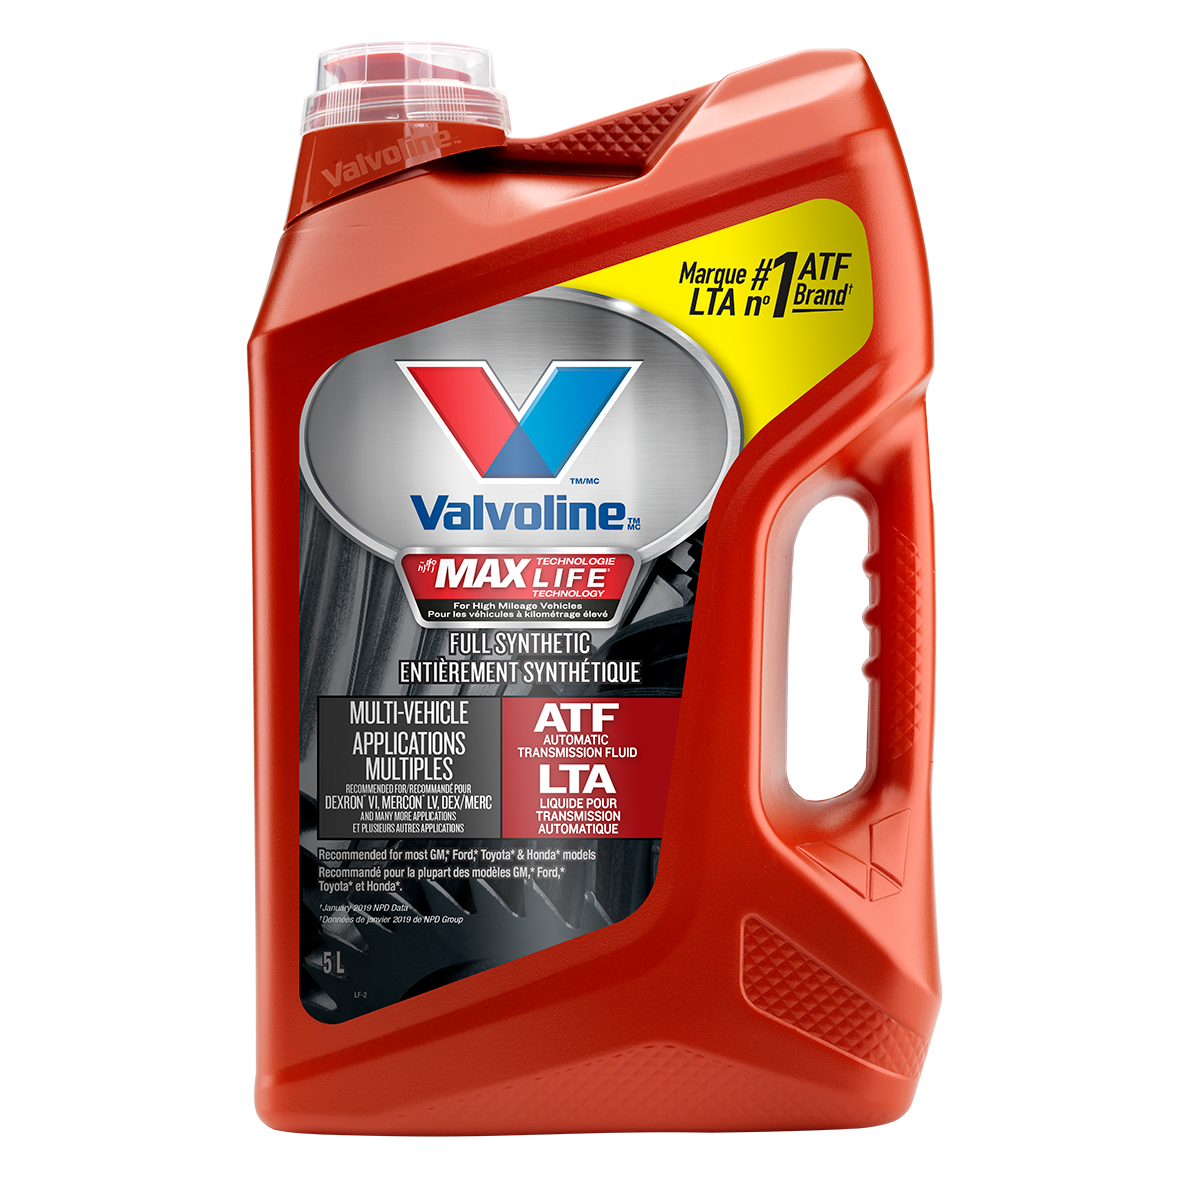 Multi-Vehicle (ATF) Full Synthetic Automatic Transmission Fluid .